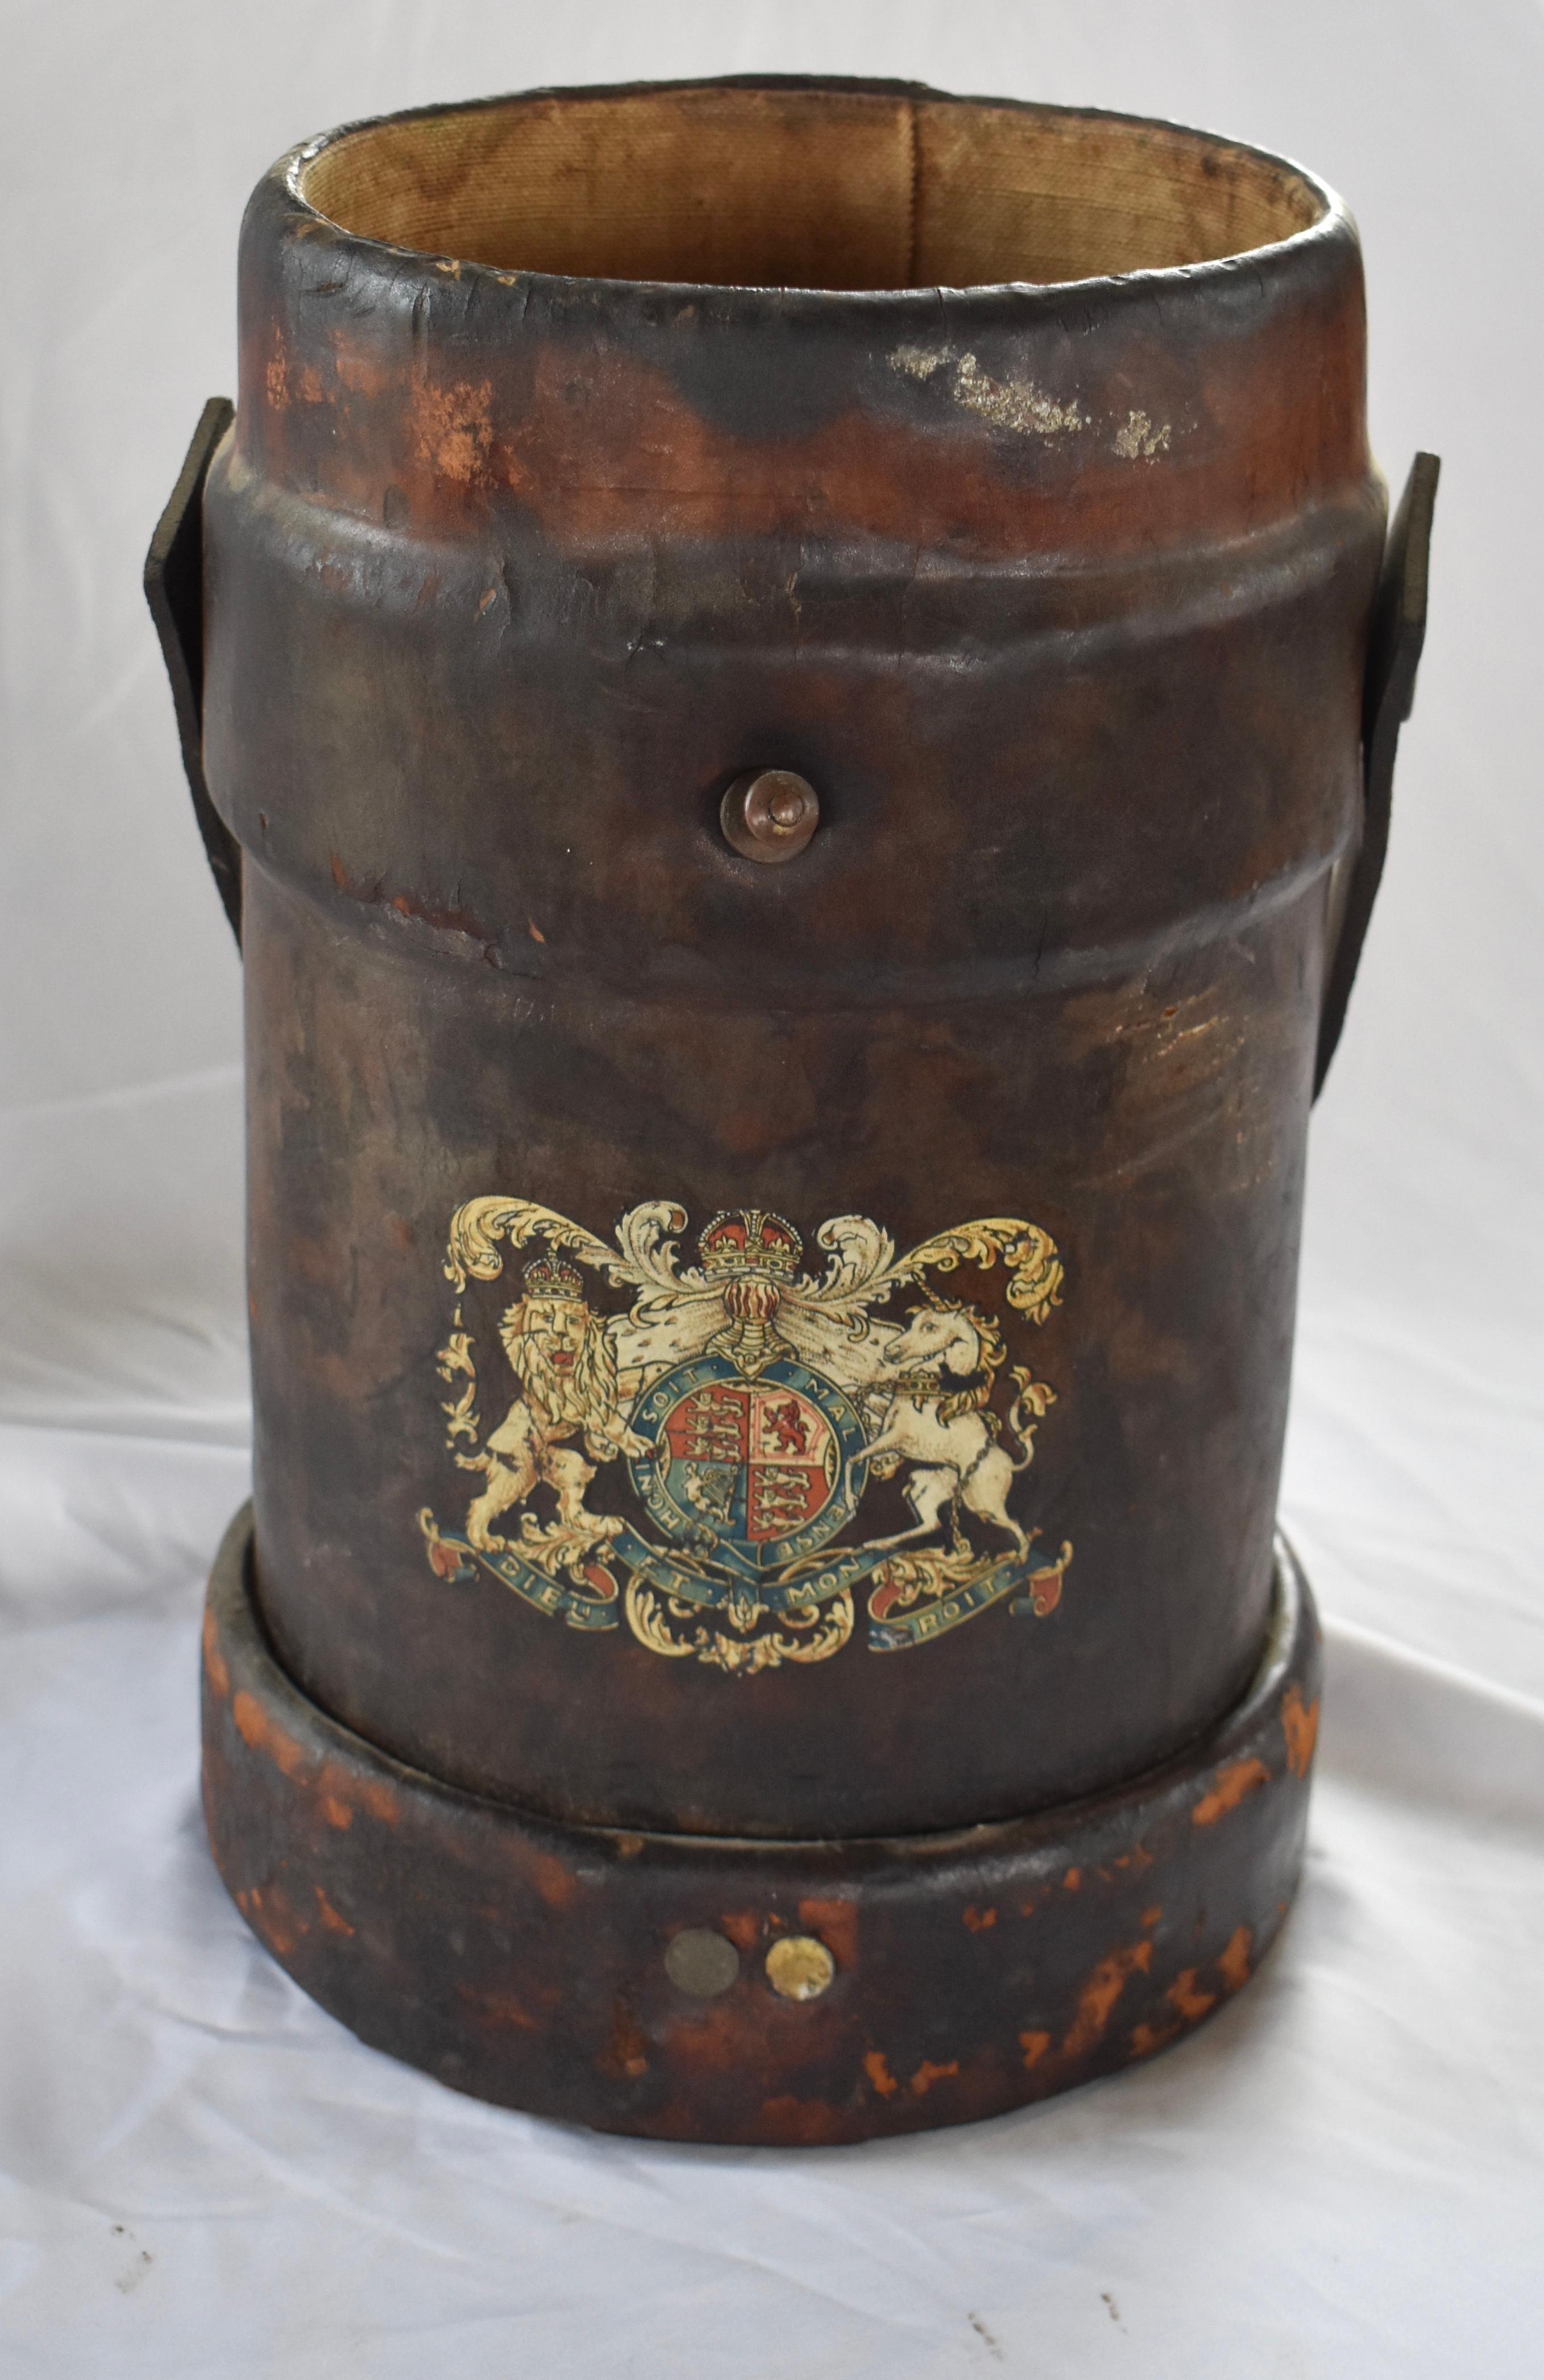 Cordite buckets were used by the British navy to carry cordite, a propellant that was used to replace gunpowder. Because of their purpose, cordite buckets were built using specific materials: cork, cloth and leather. 
The leather was used on the